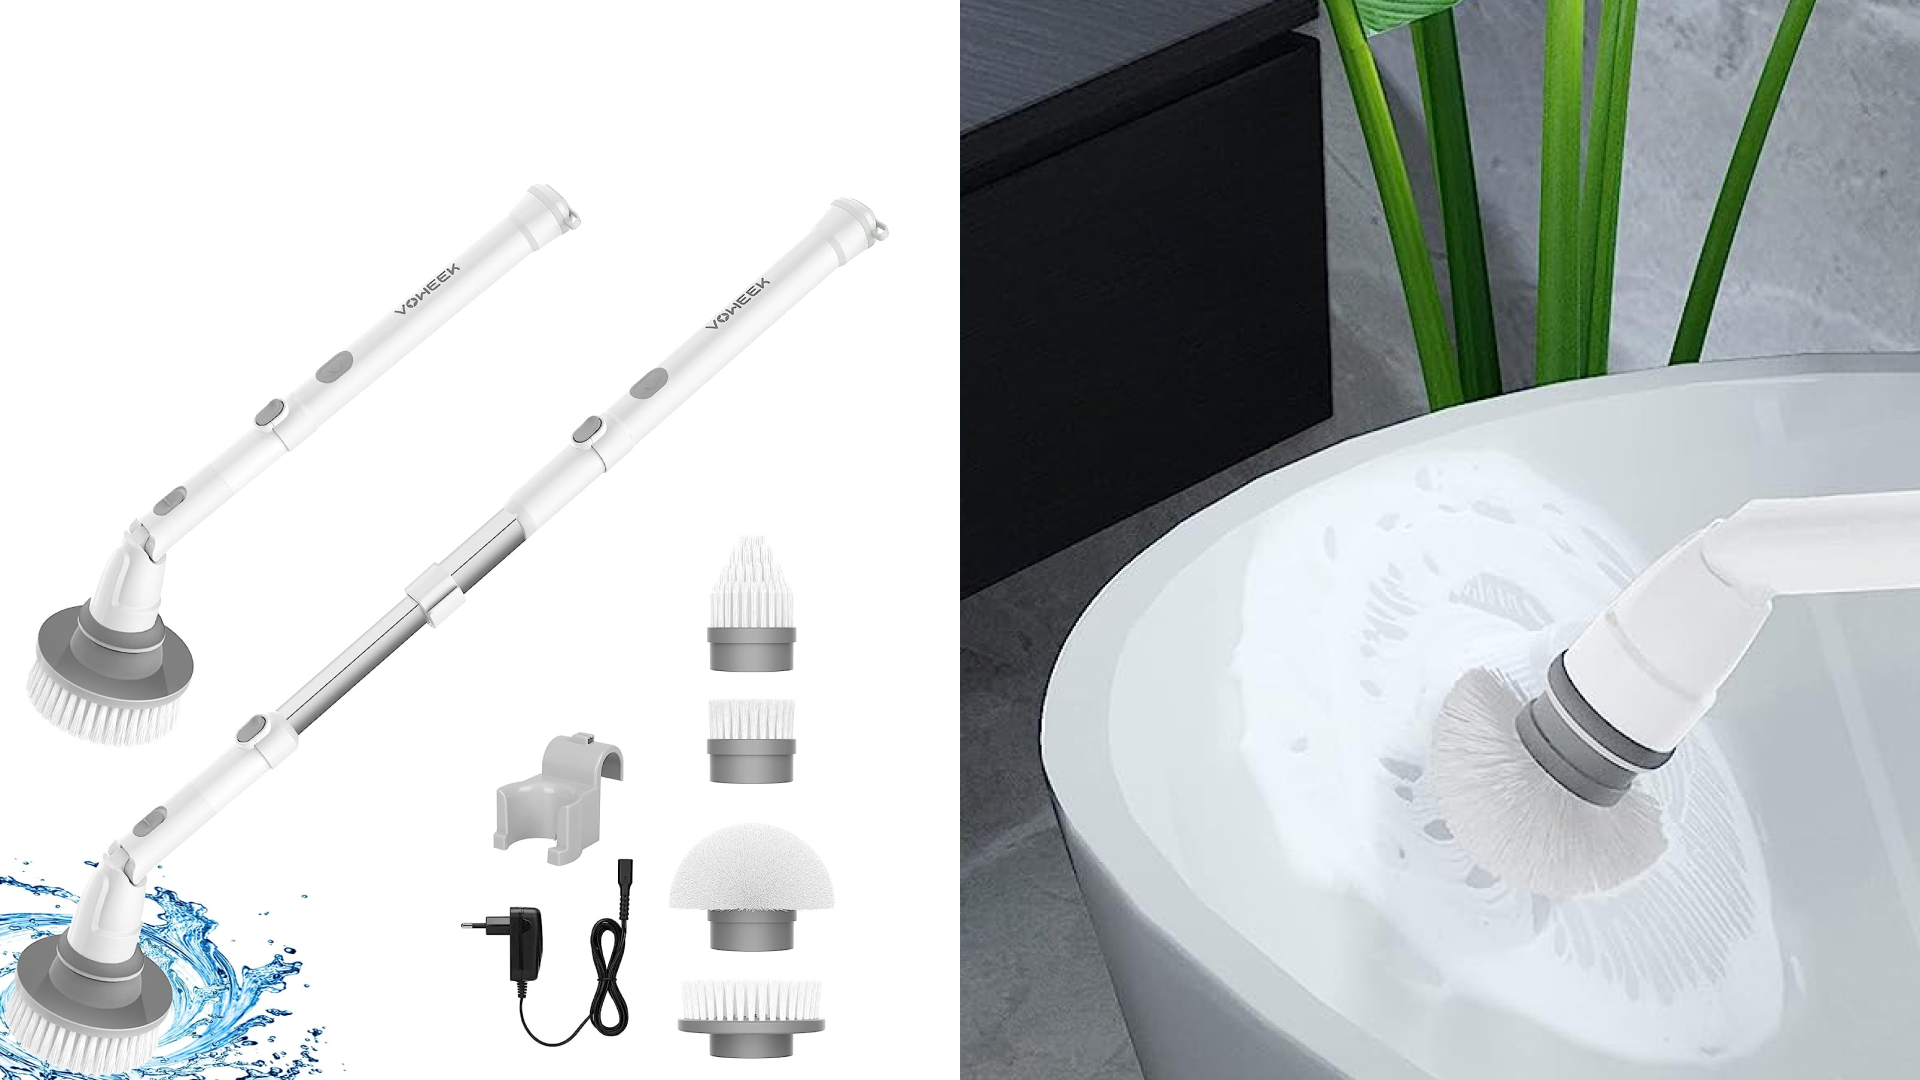 Drillbrush's Guide to Keeping Your Bathroom Spotless and Clean